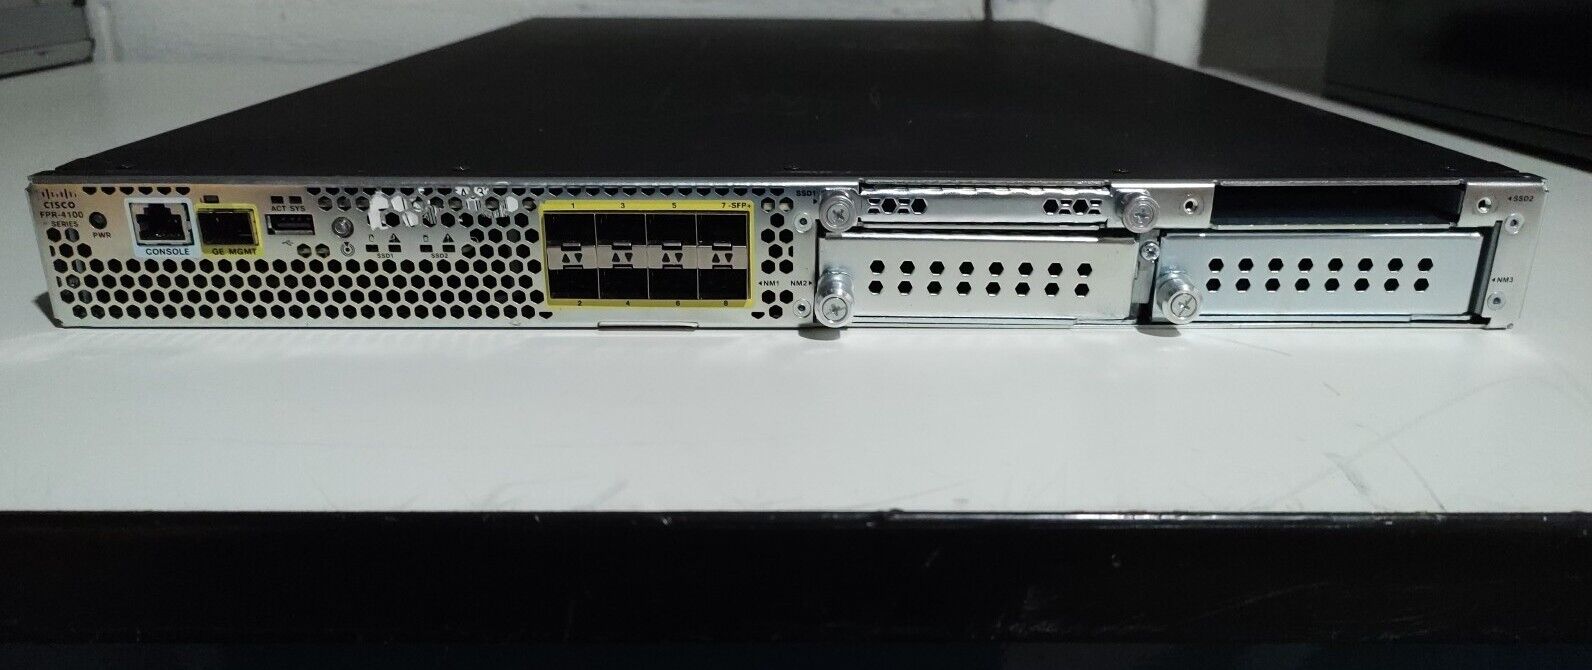 Used Cisco FPR4140-NGIPS-K9 4140 NGIPS Appliance FPR-4100